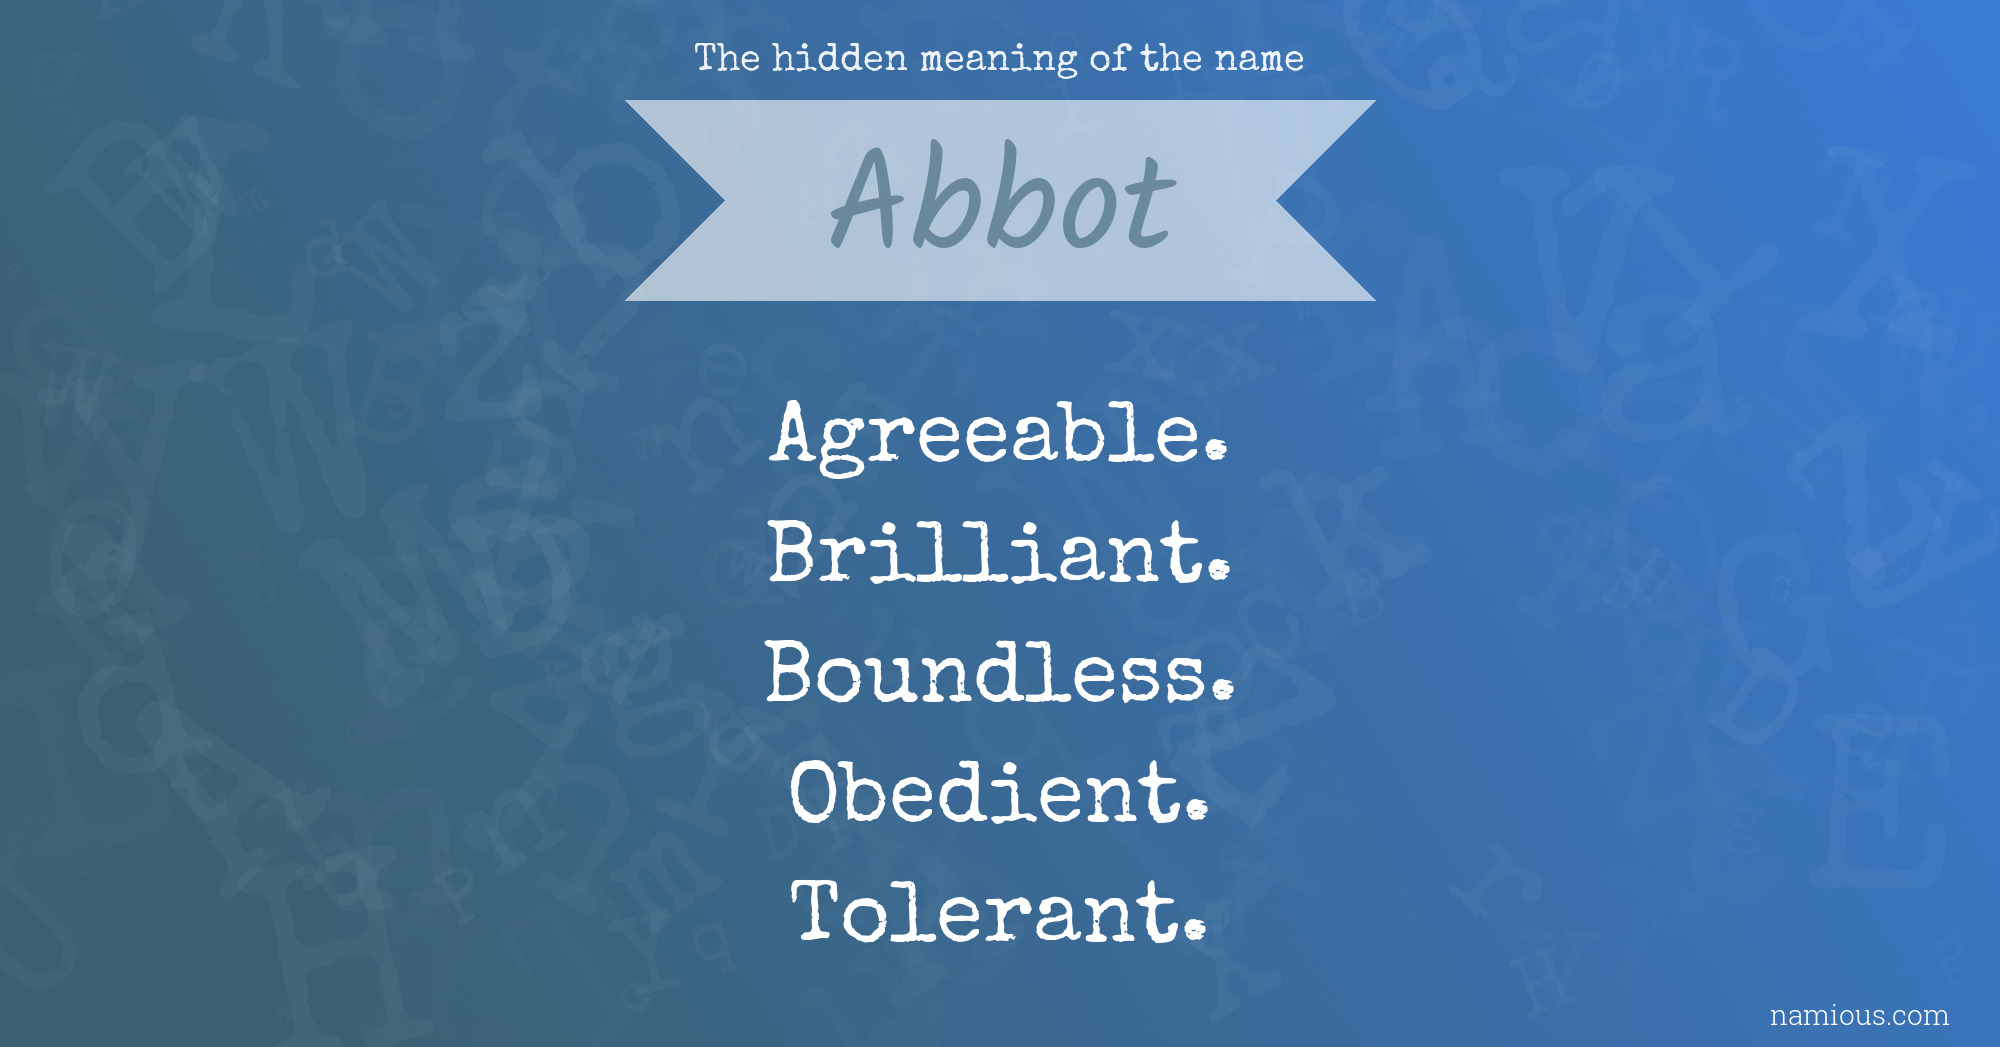 The hidden meaning of the name Abbot